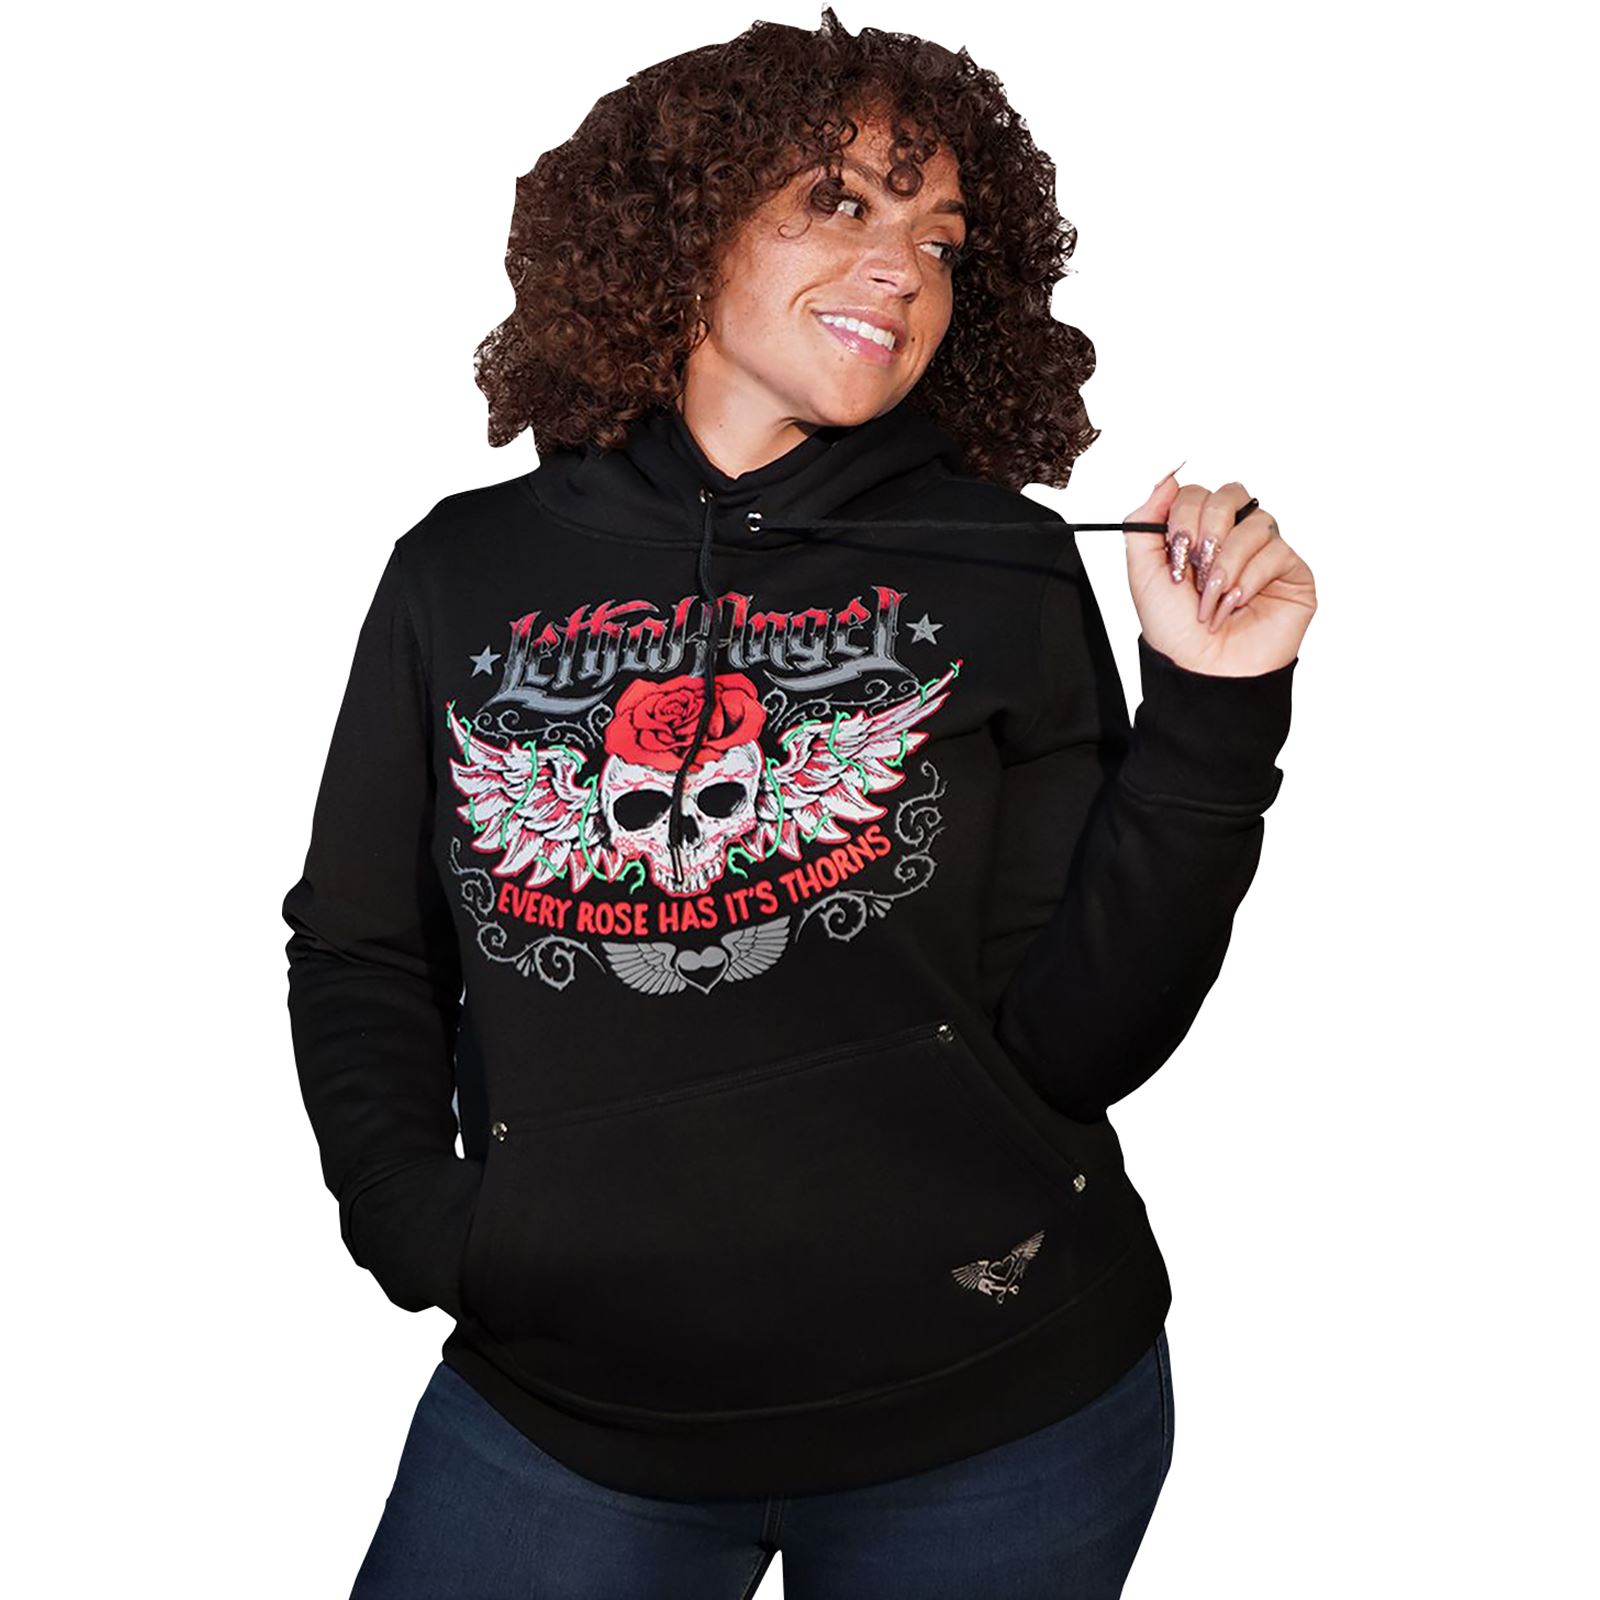 Lethal Threat Decals Women's Skulls and Thorns Pullover Hoodie - Black - Medium